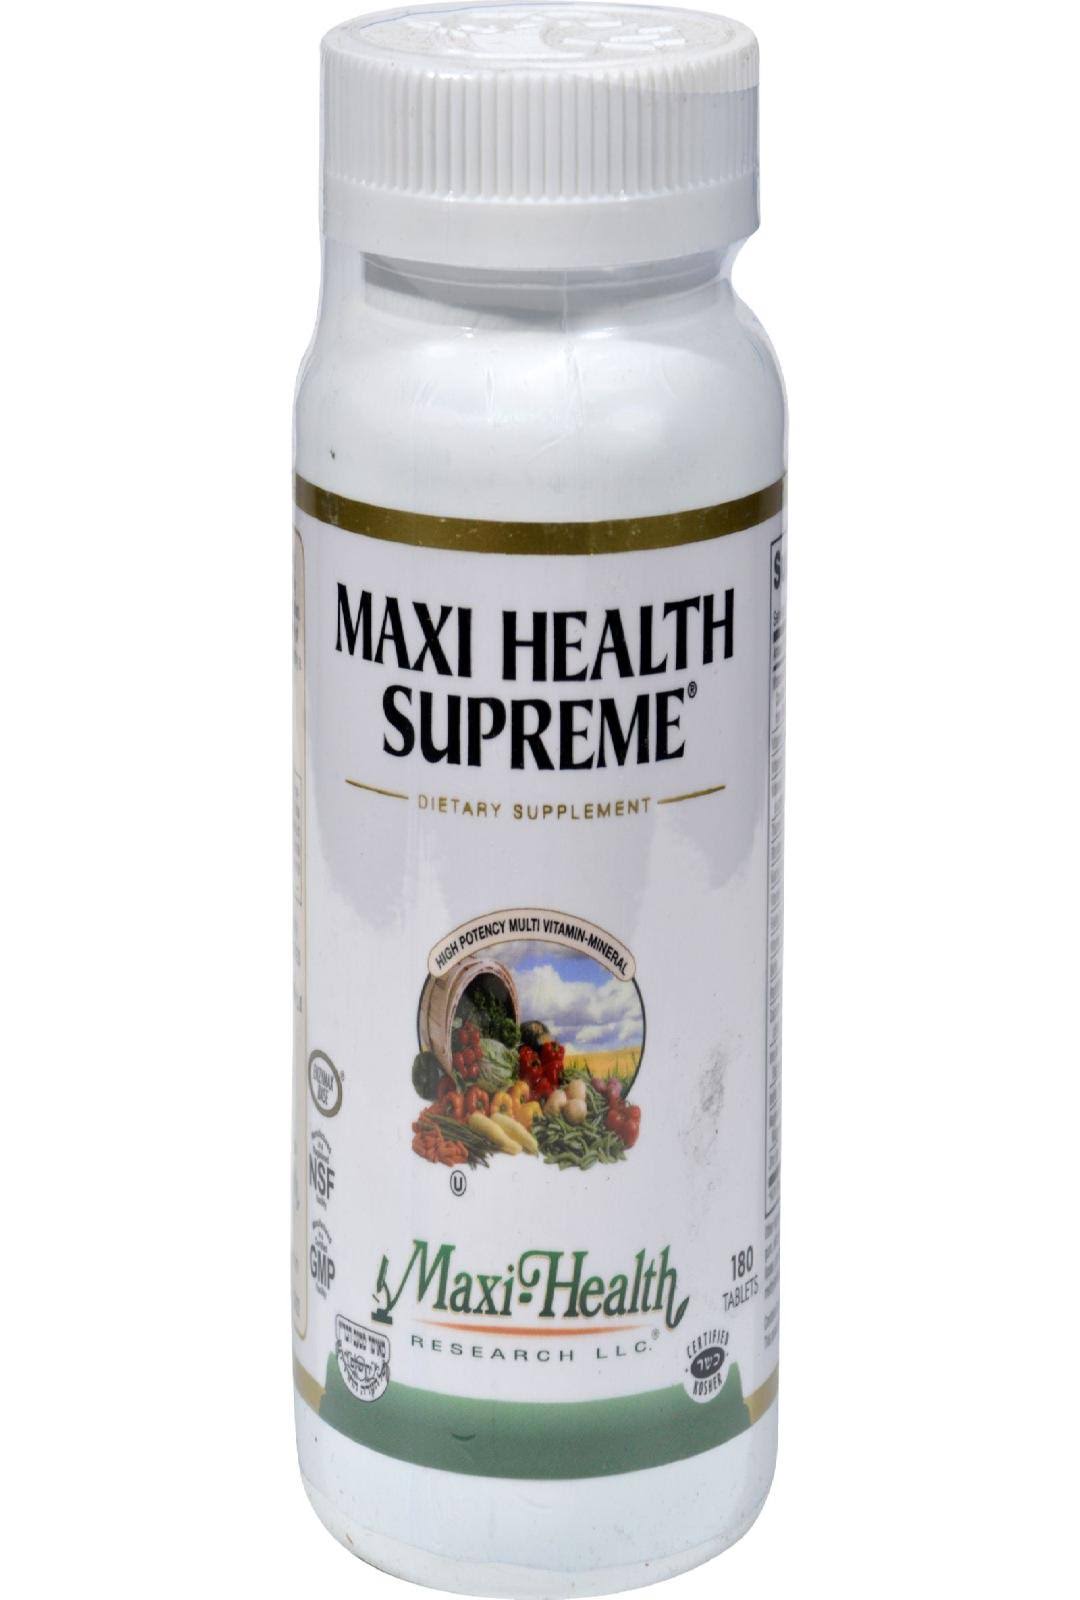 Maxi Health Supreme High Potency Multivitamin and Mineral Supplement - 180 Count